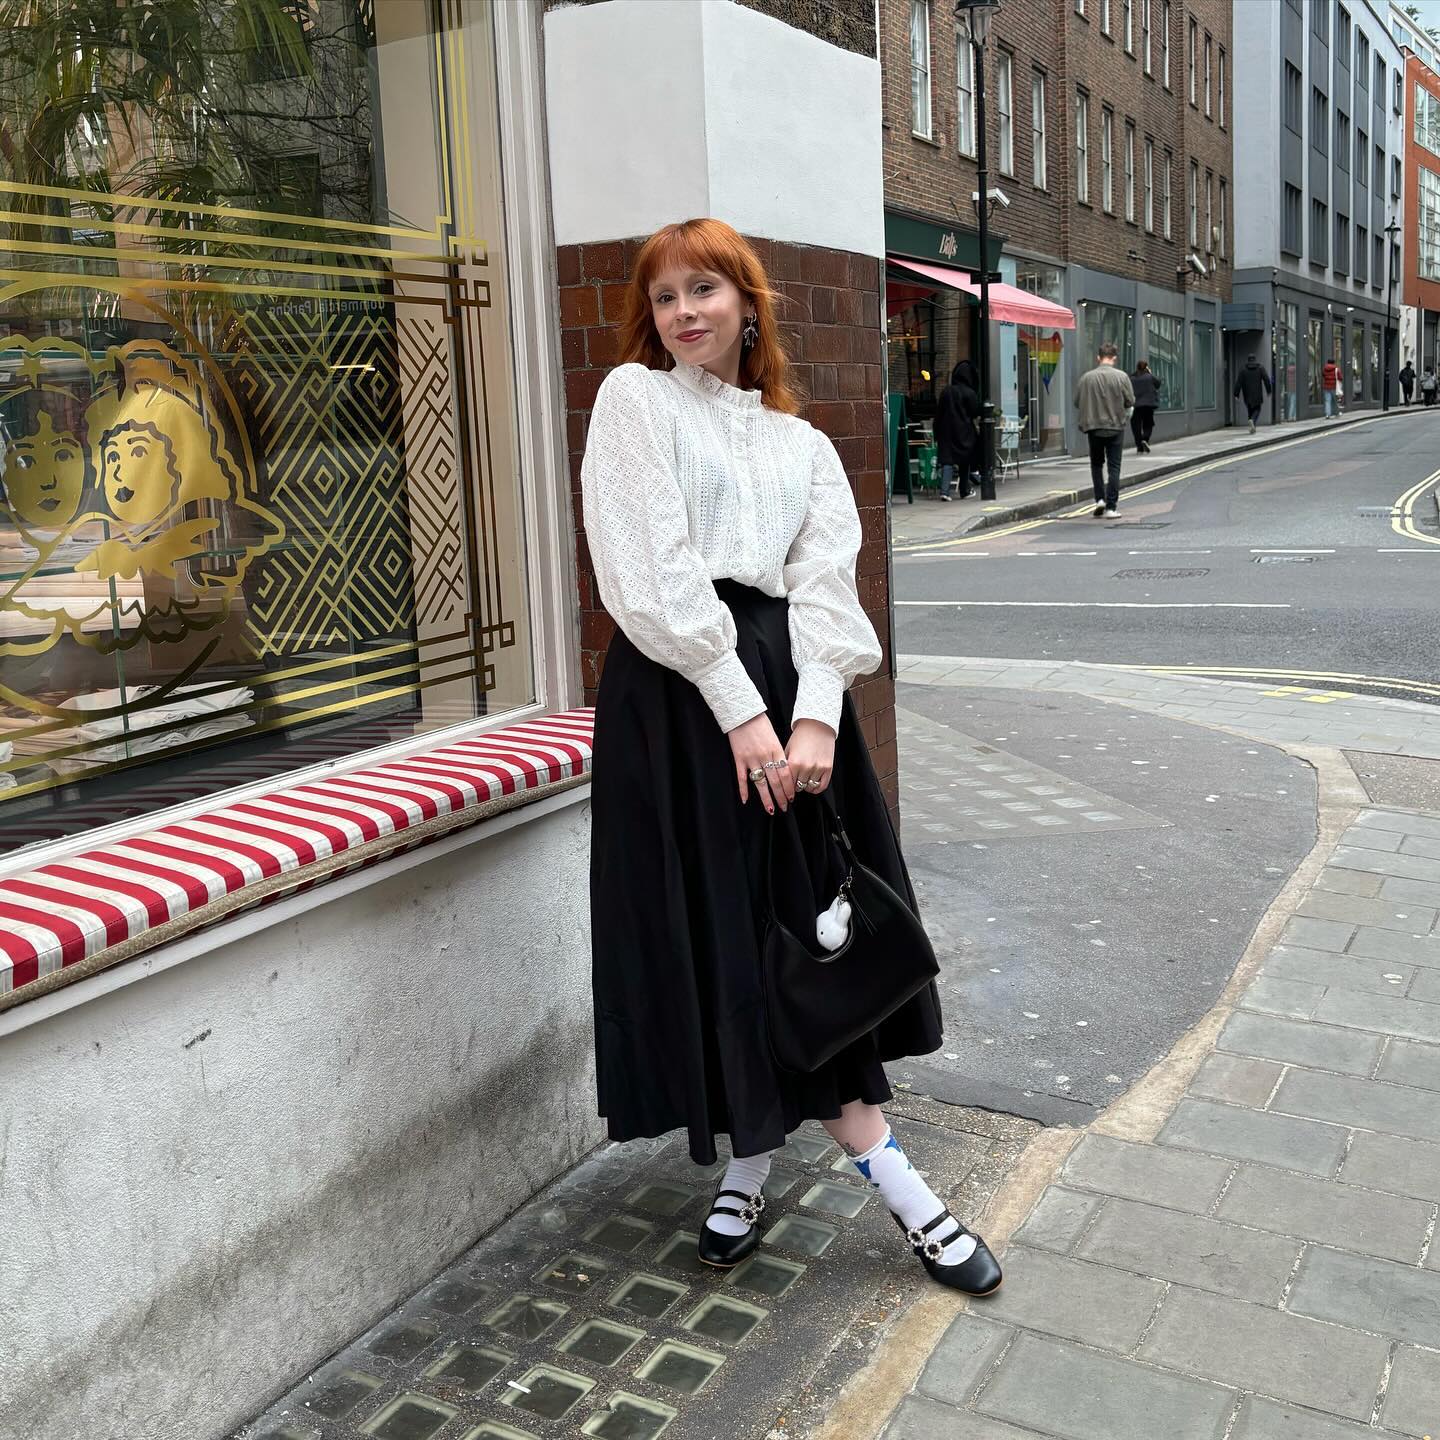 Content creator @alrstockwell in a black pleated maxi skirt and a white blouse posing in front of a window display